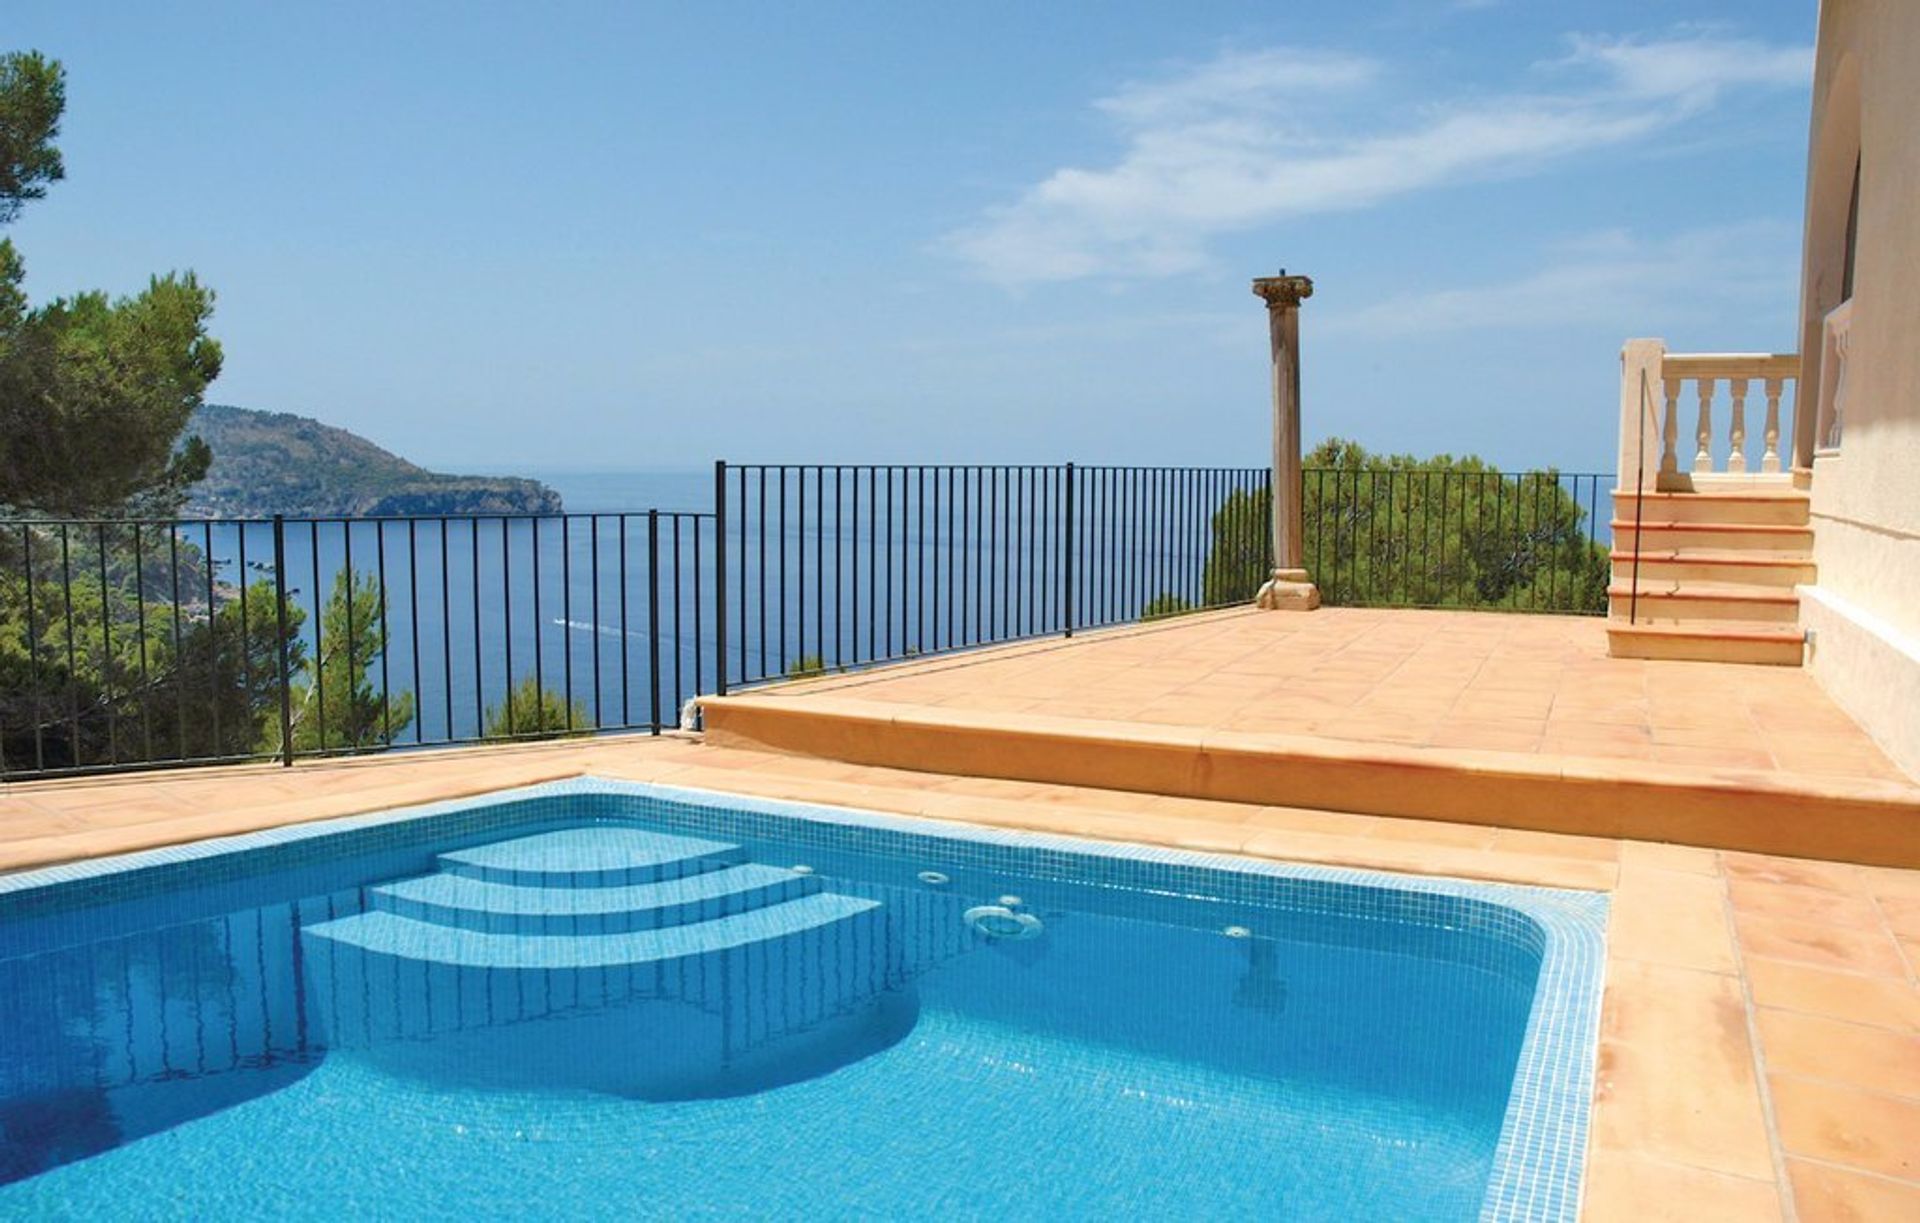 Four bedroom villa in Sóller with own pool. Panoramic sea views!